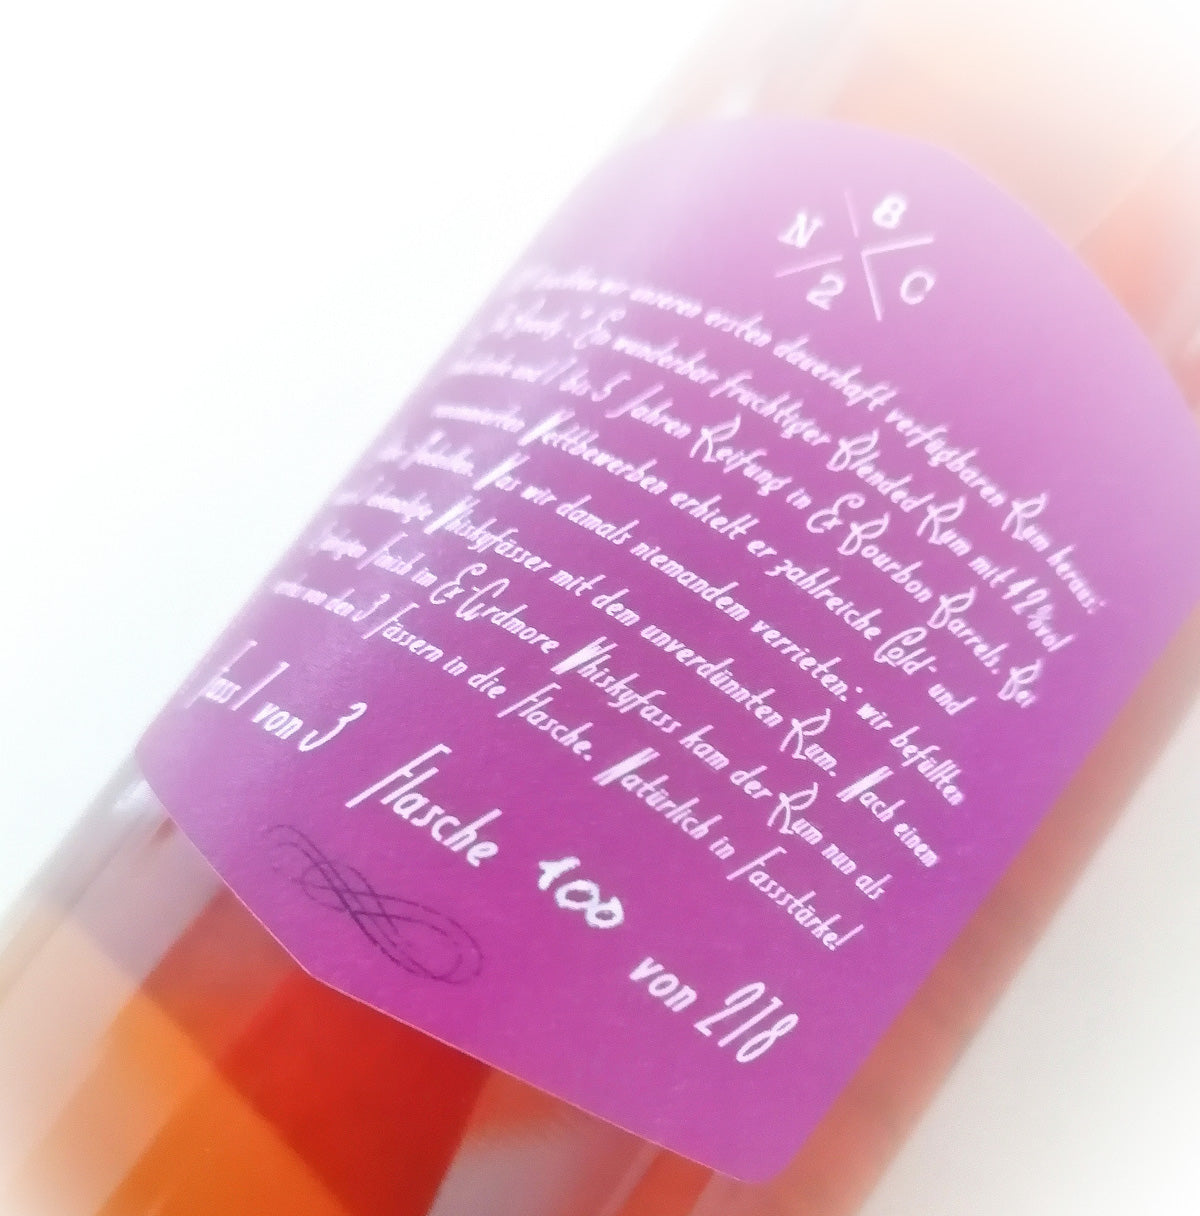 Cask Strength "The Beauty" Rum ⨳ Single Cask ⨳ 2 Jahre Ardmore Fass Finish